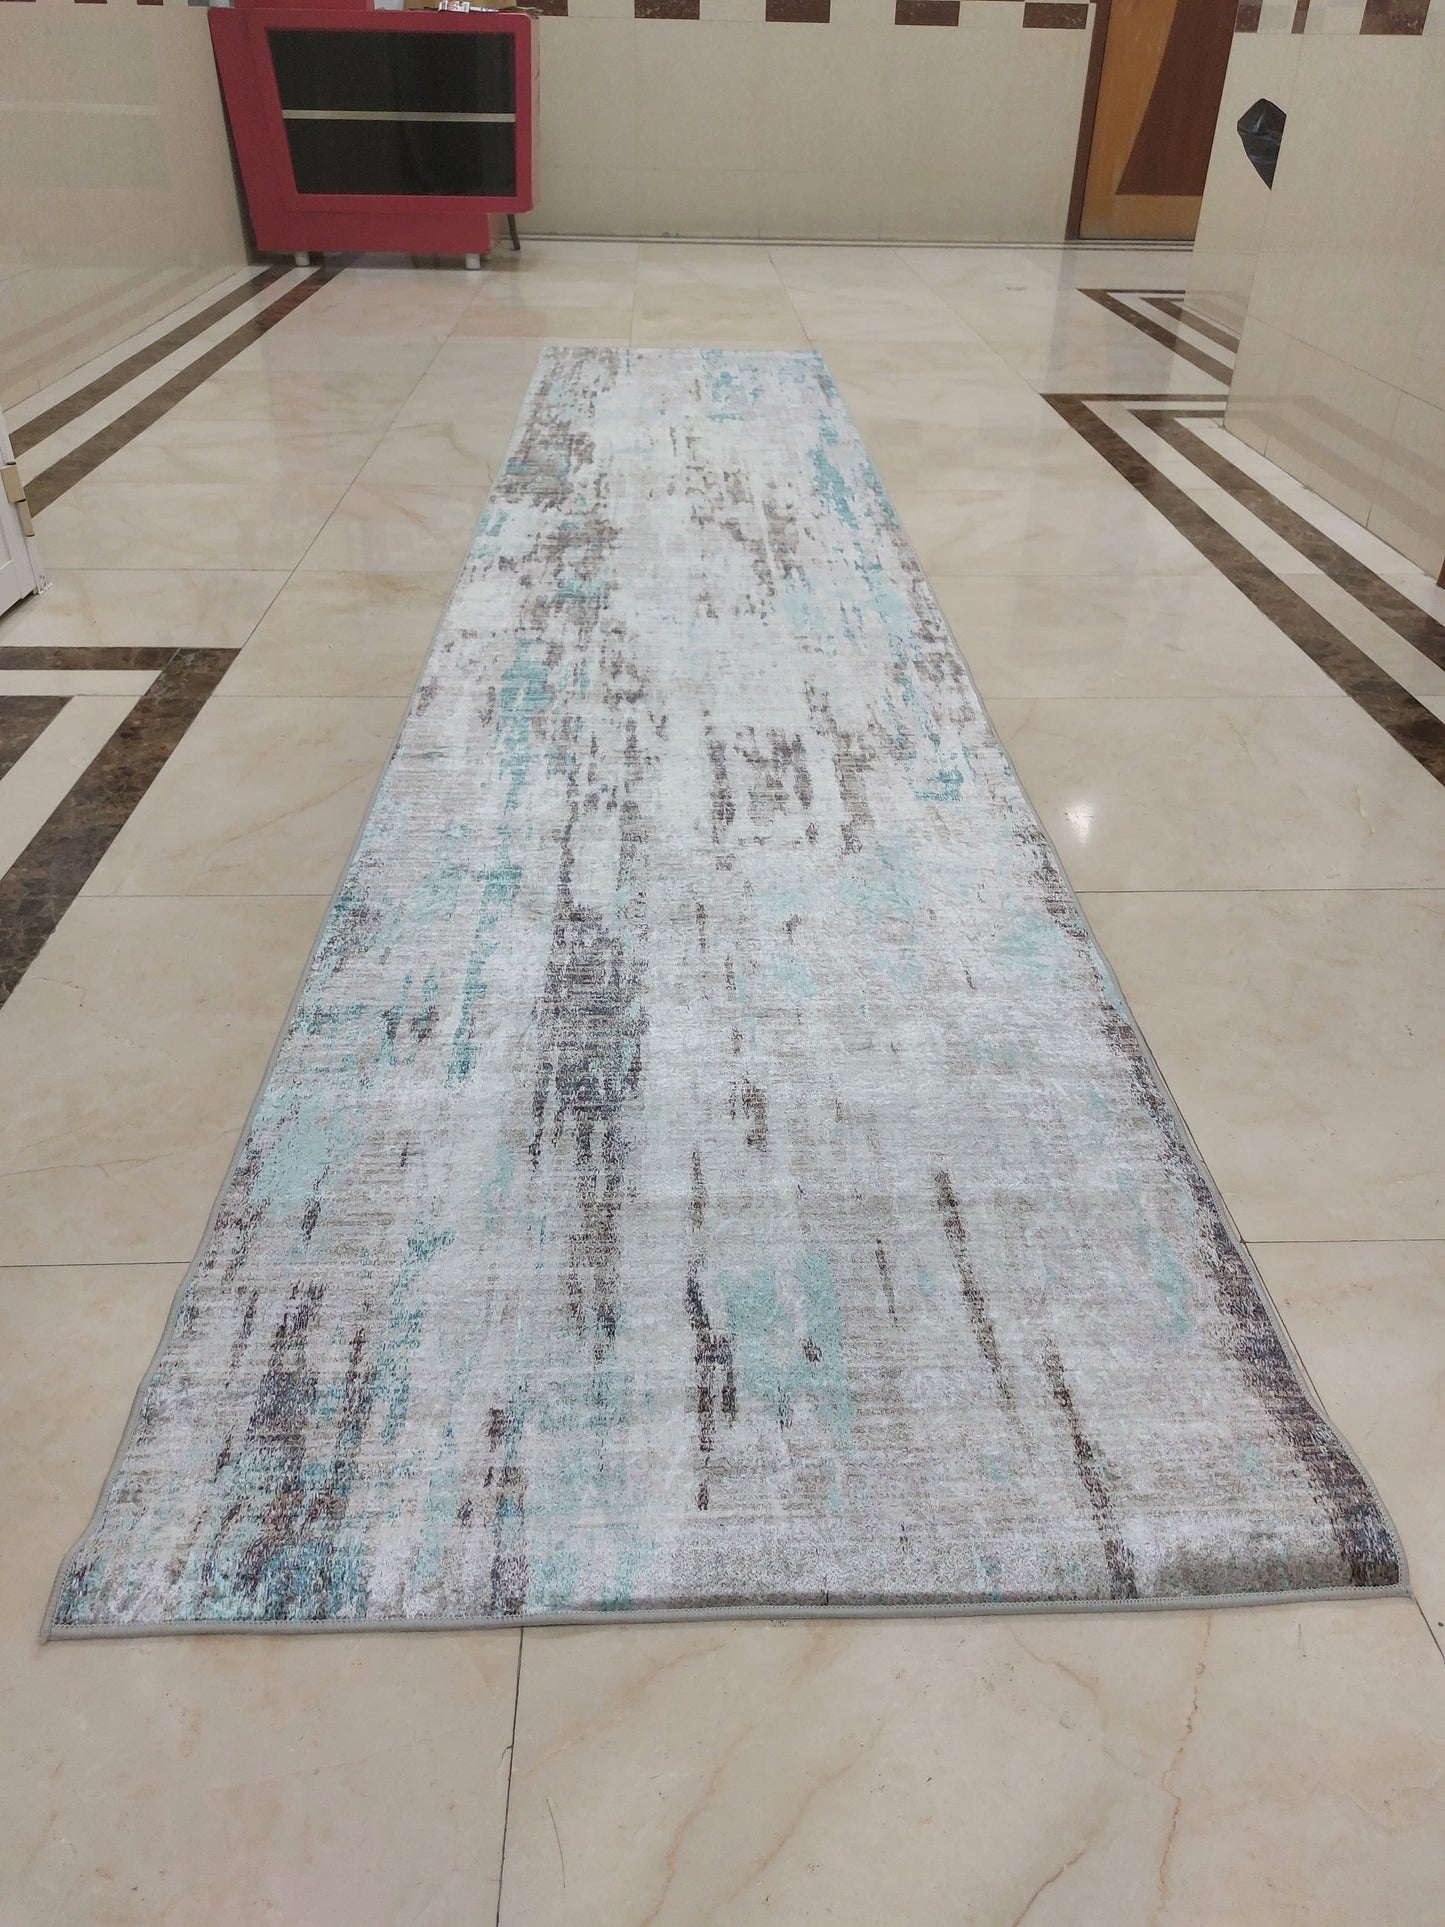 Brand New Crystal  carpet - Runner - Anti slip with Quality specifications 90 x 427cm►2.95 x 14.00ft